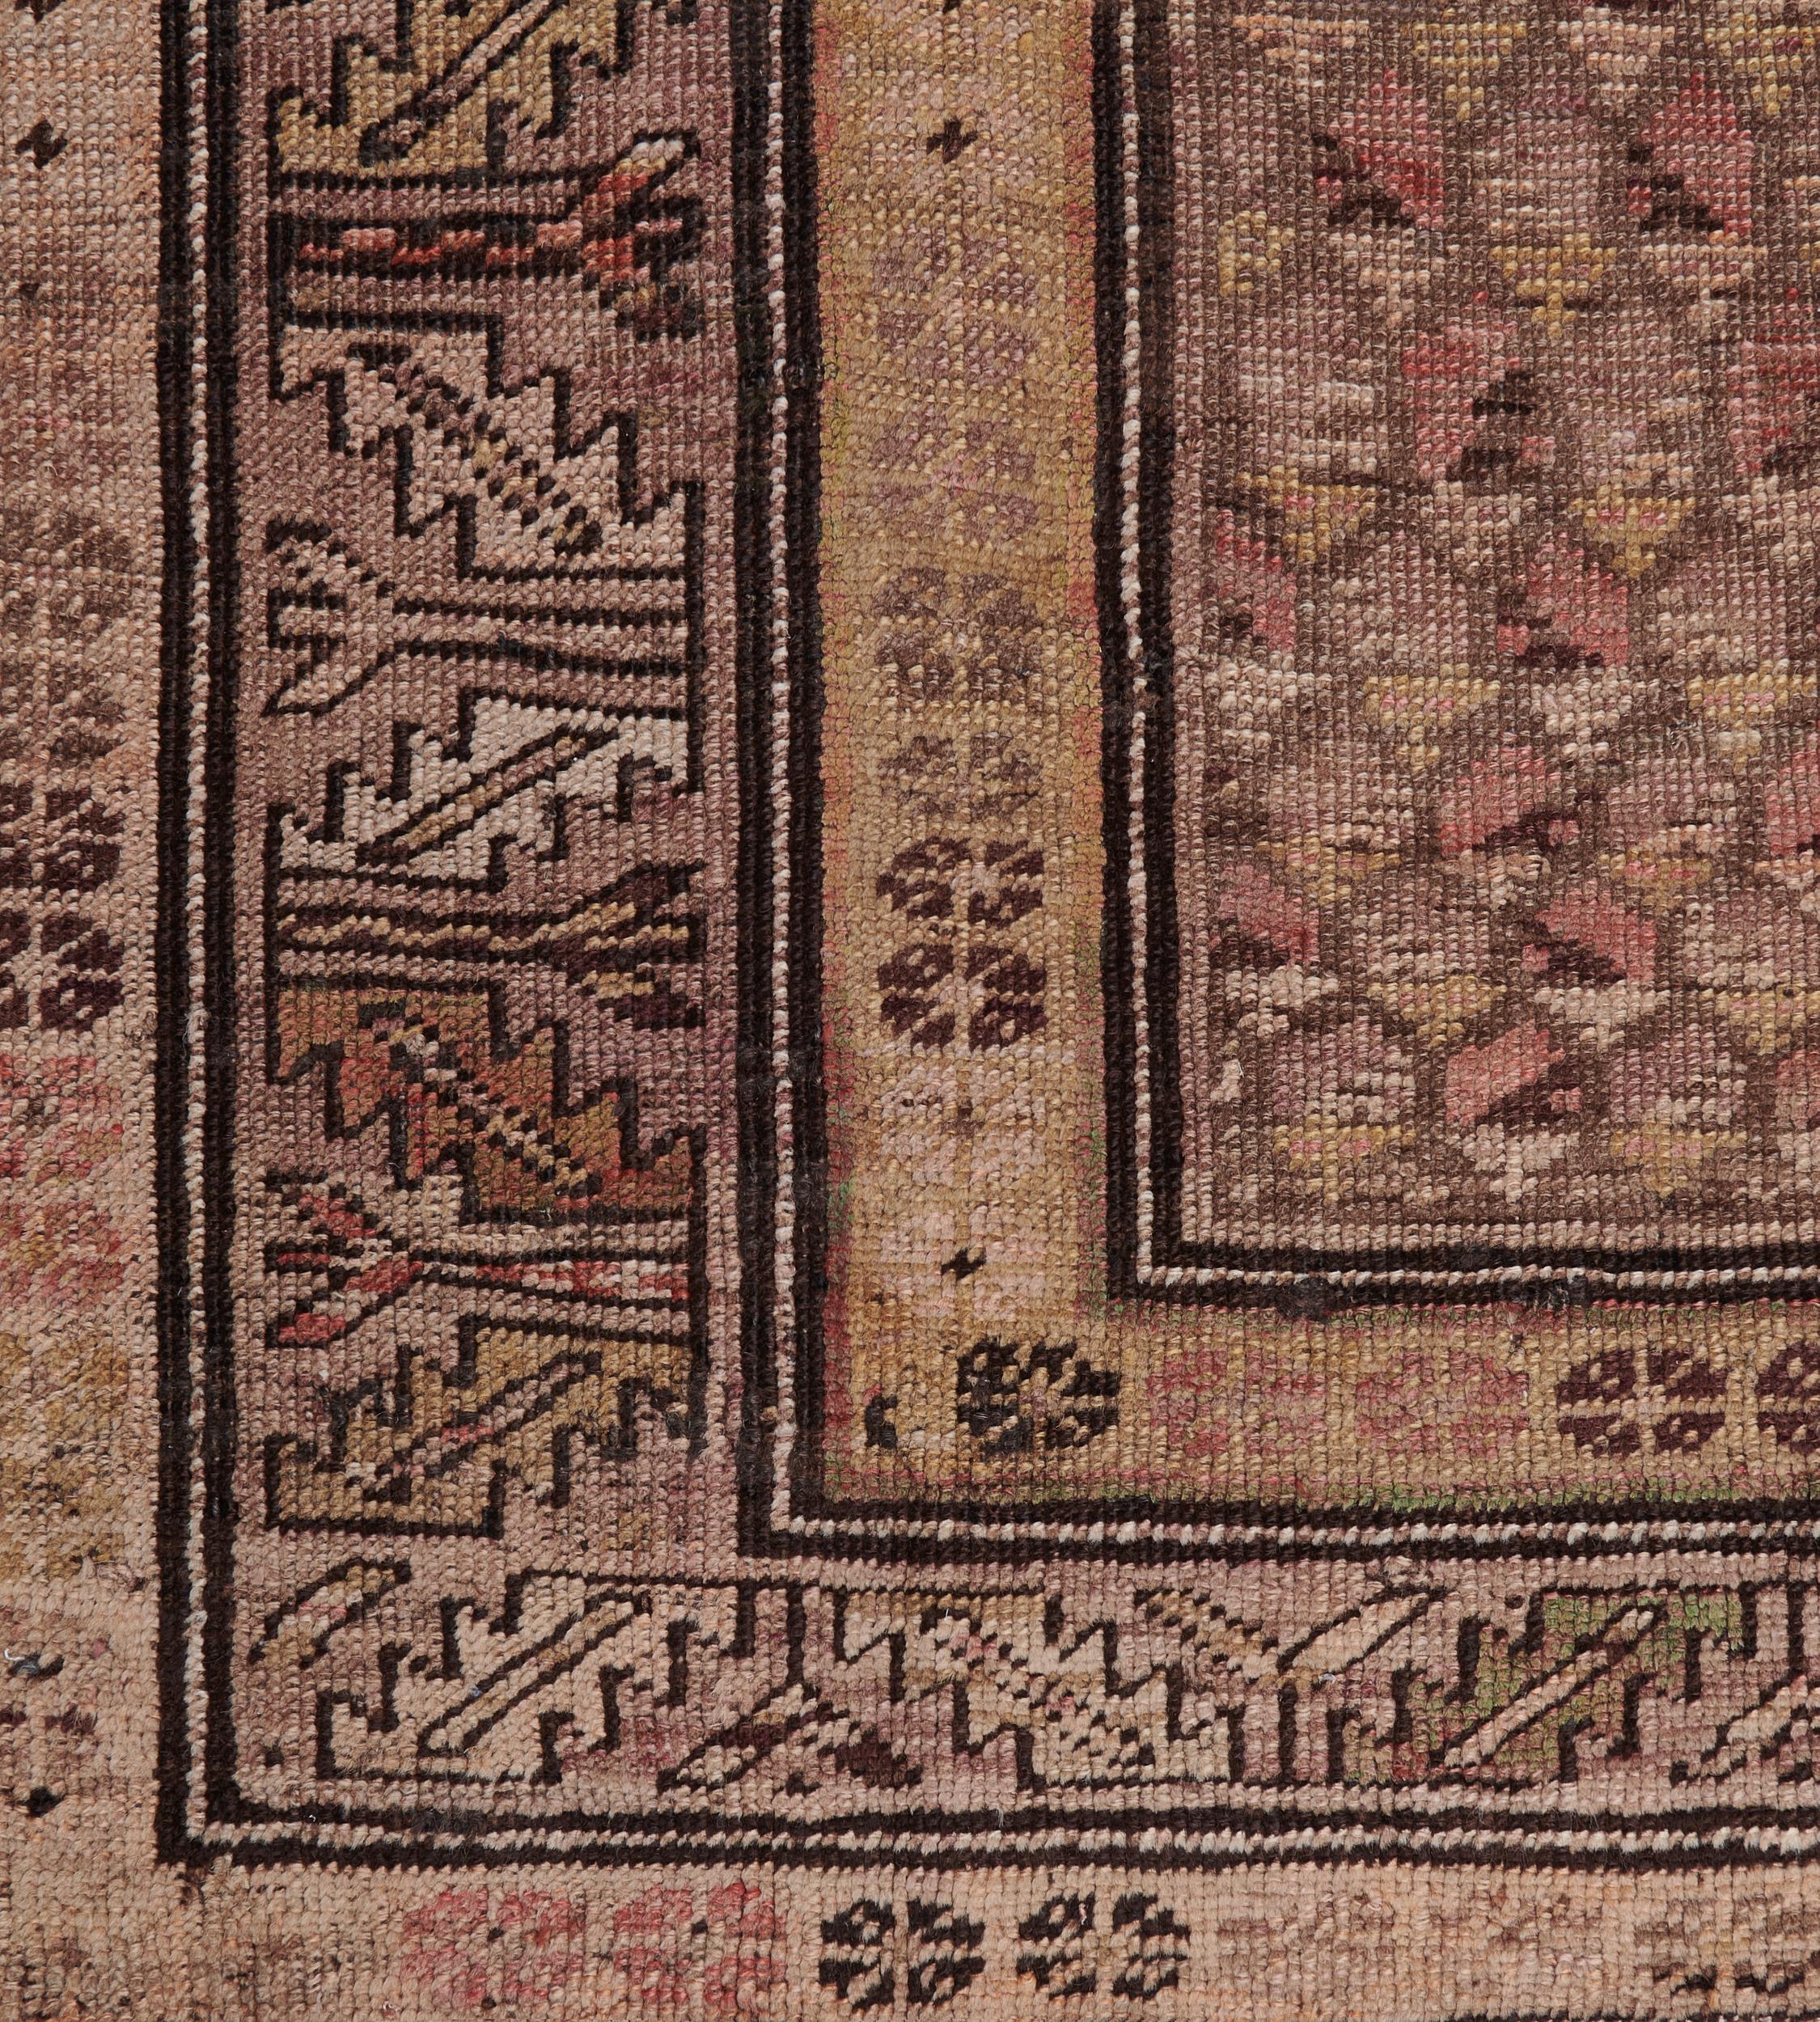 This traditional hand-woven Persian Karabagh rug has a shaded tobacco field with an overall copper paisley pattern, in a broad shaded tobacco serrated leaf border, between shaded sandy cream geometric rosette stripes.